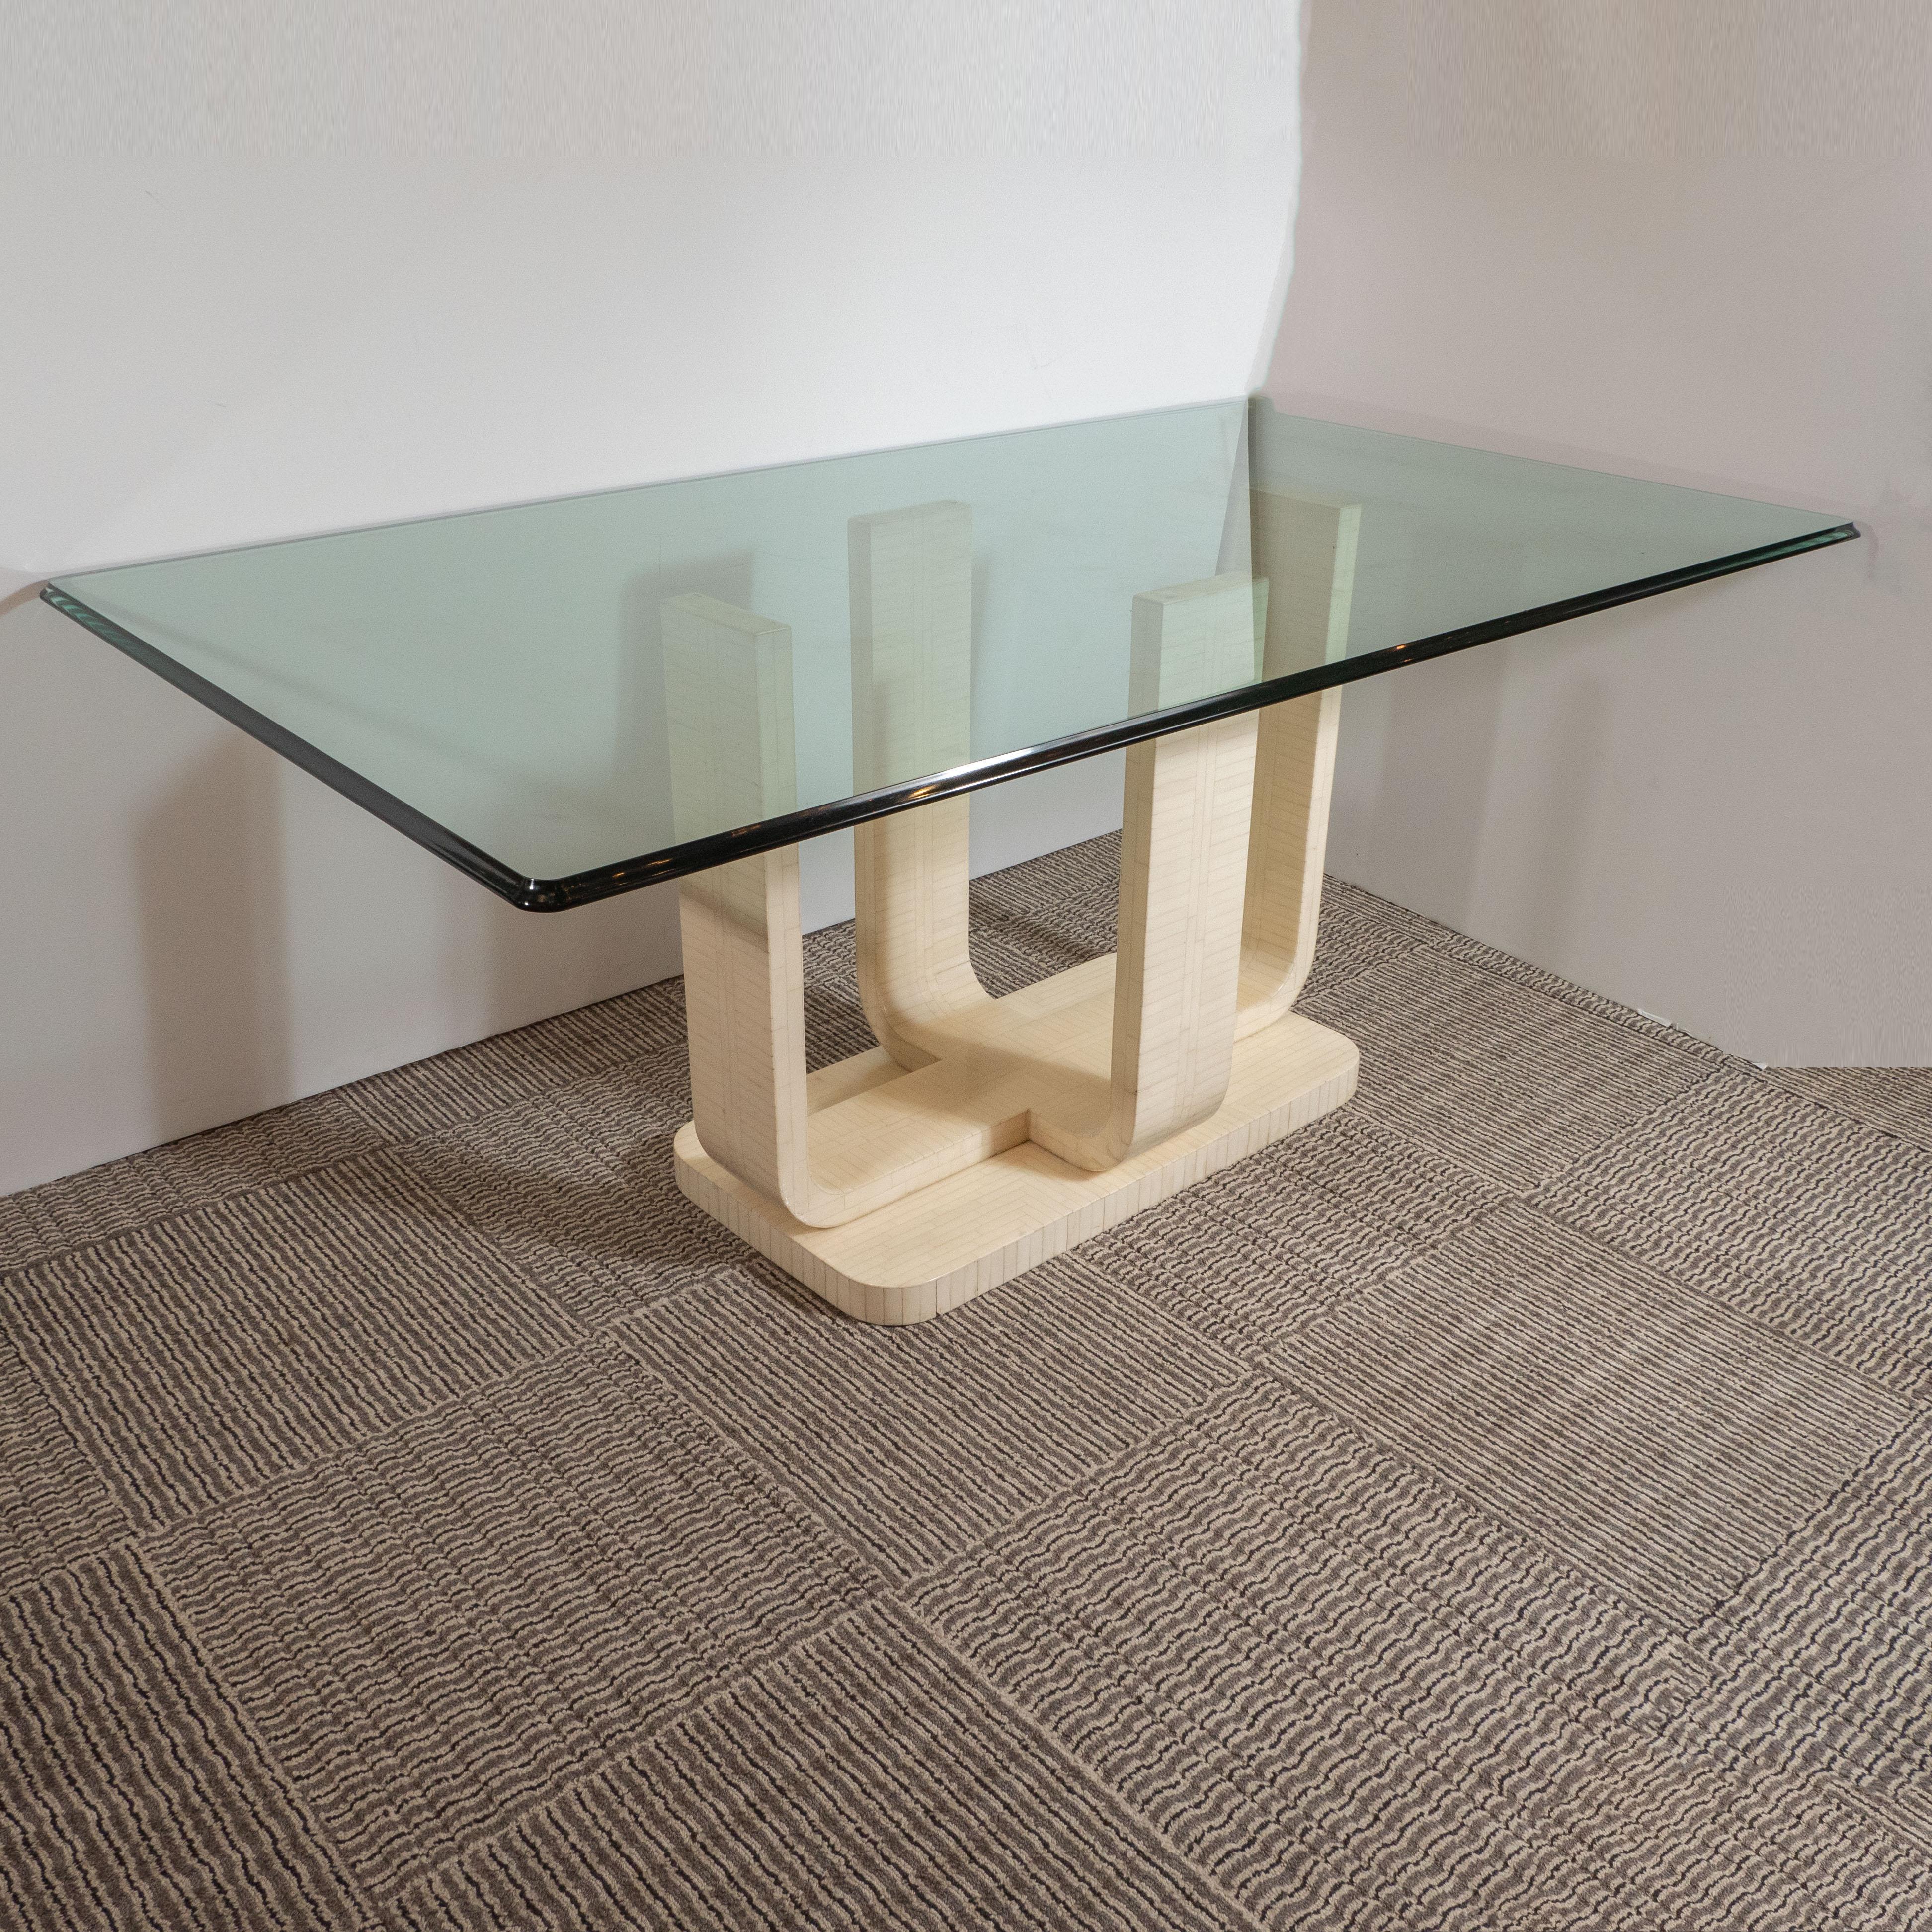 American Mid-Century Modern Tessellated Stone and Glass Dining Table by Maitland-Smith